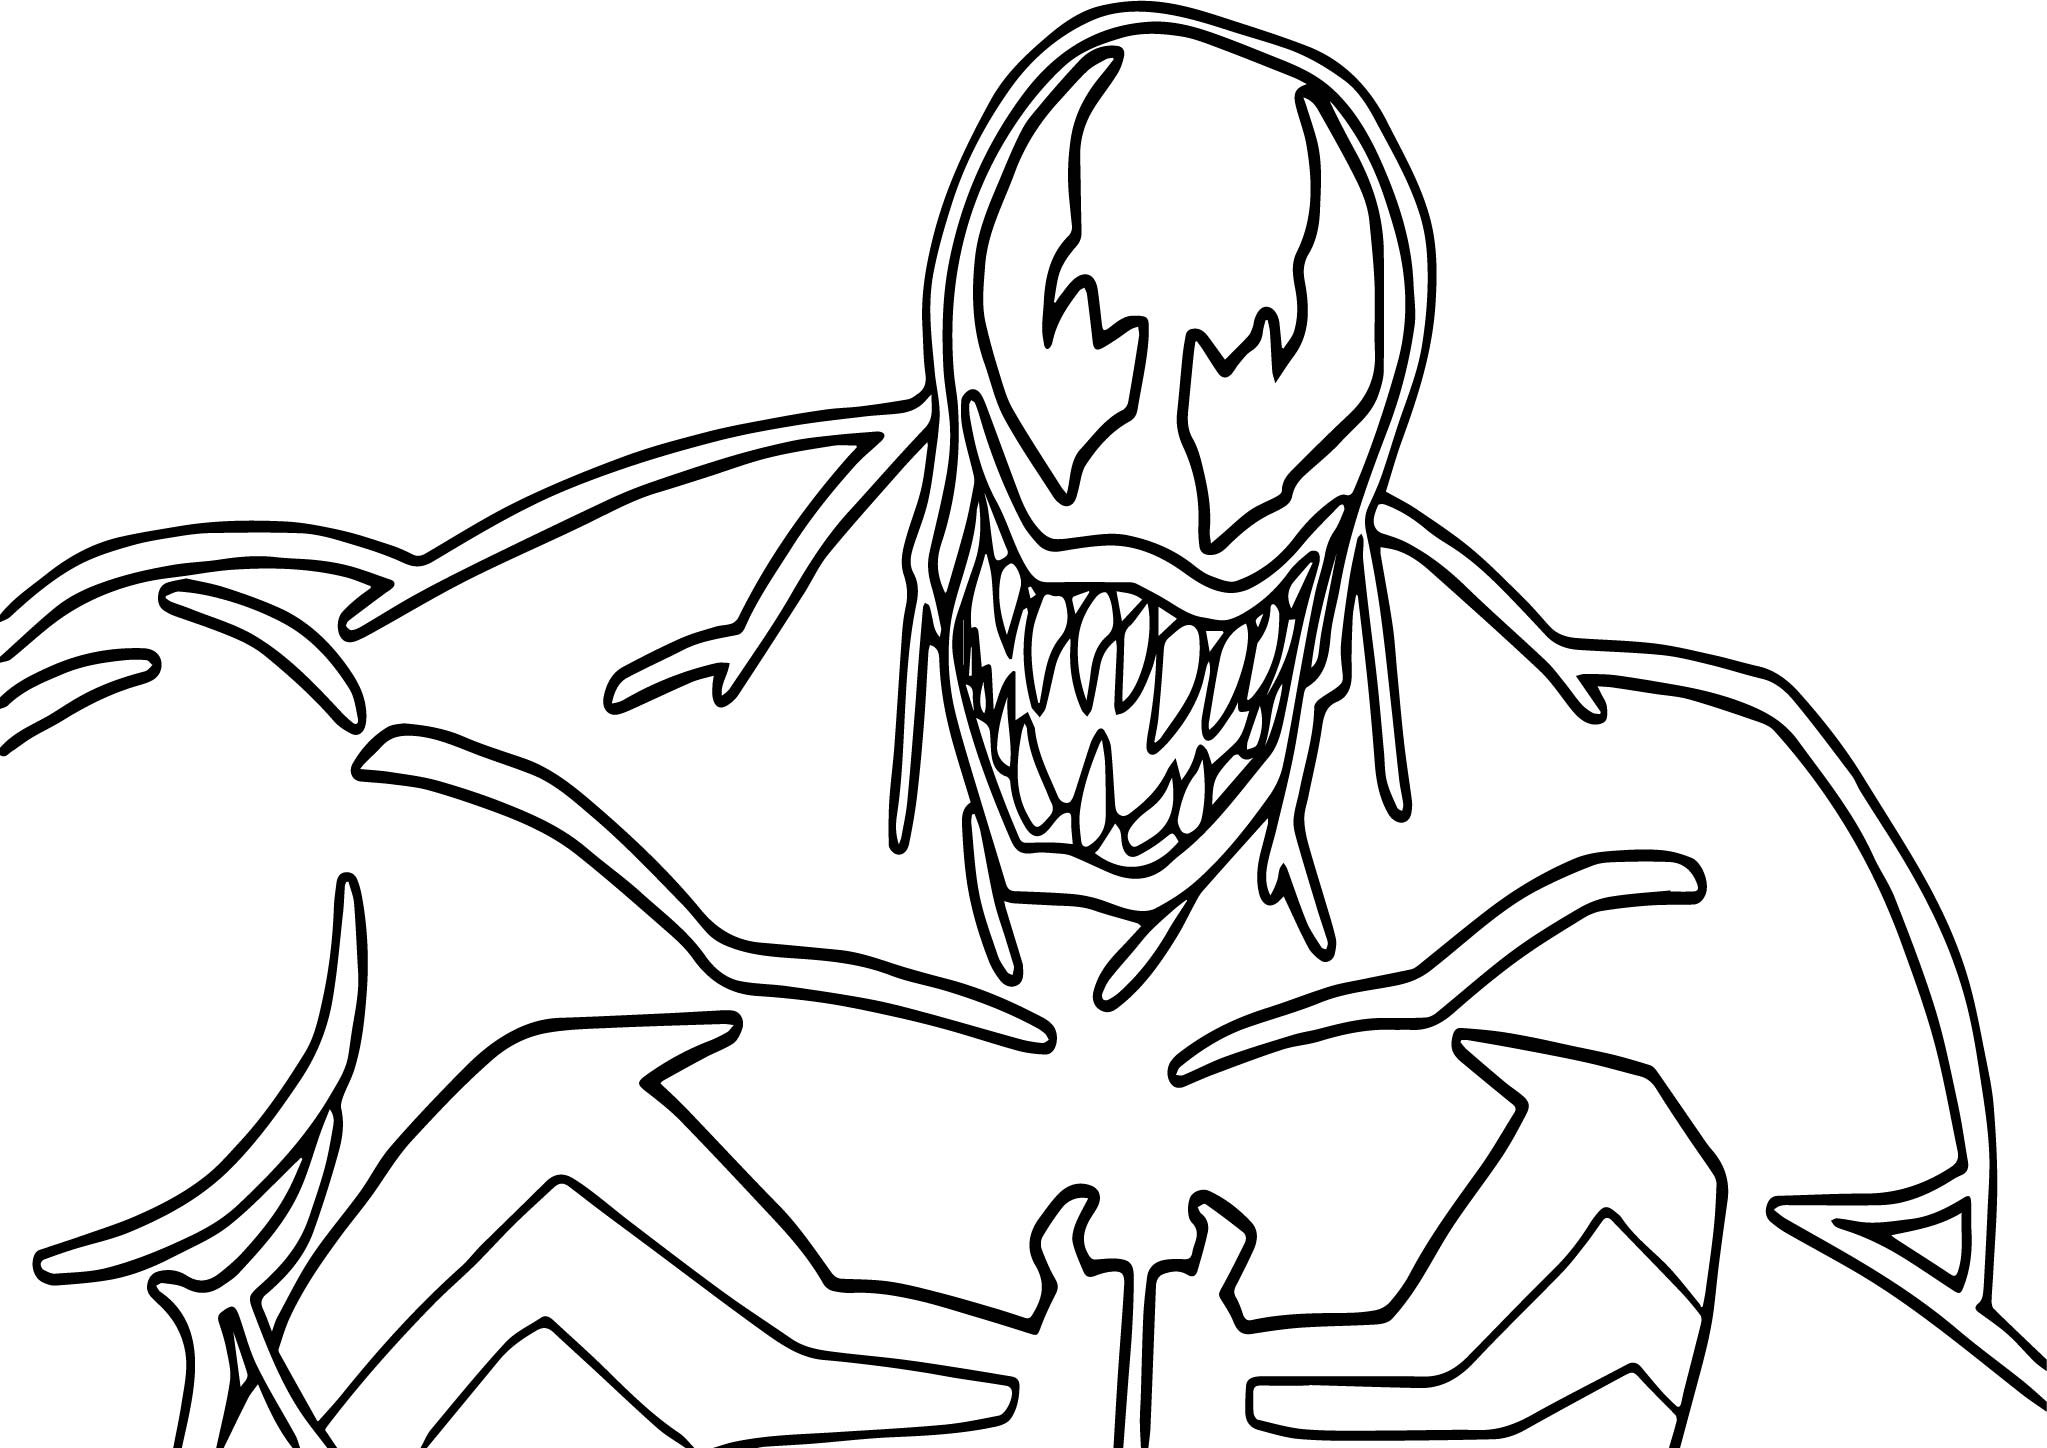 Spiderman Venom Coloring Pages at GetColorings.com | Free ...